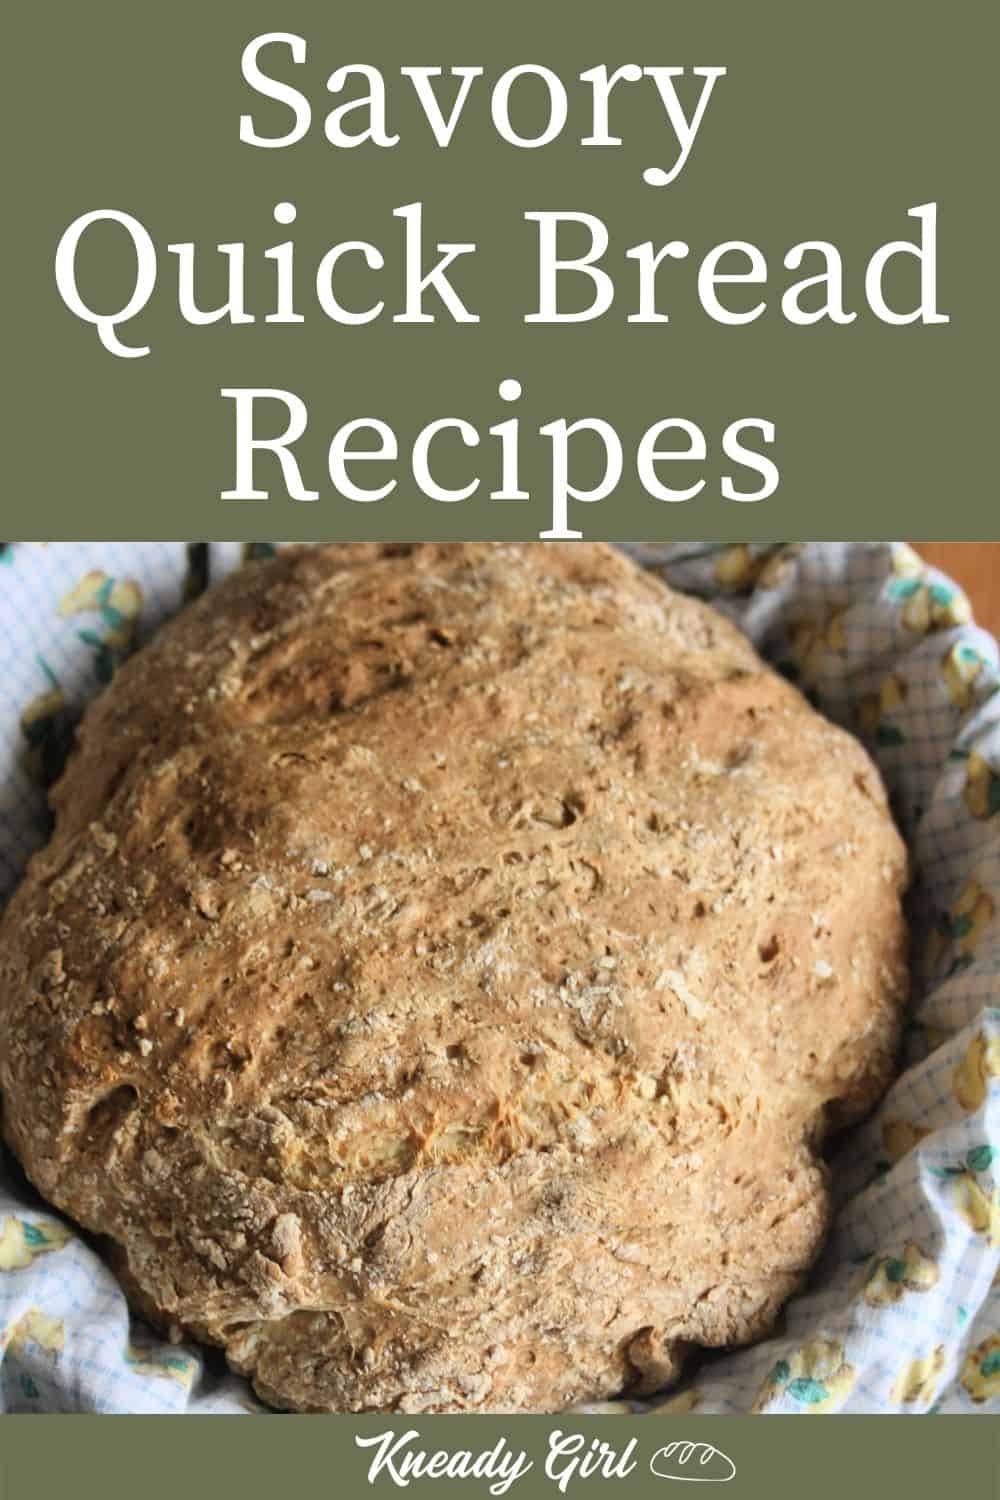 Savory Bread Recipes Without Yeast - Kneady Girl